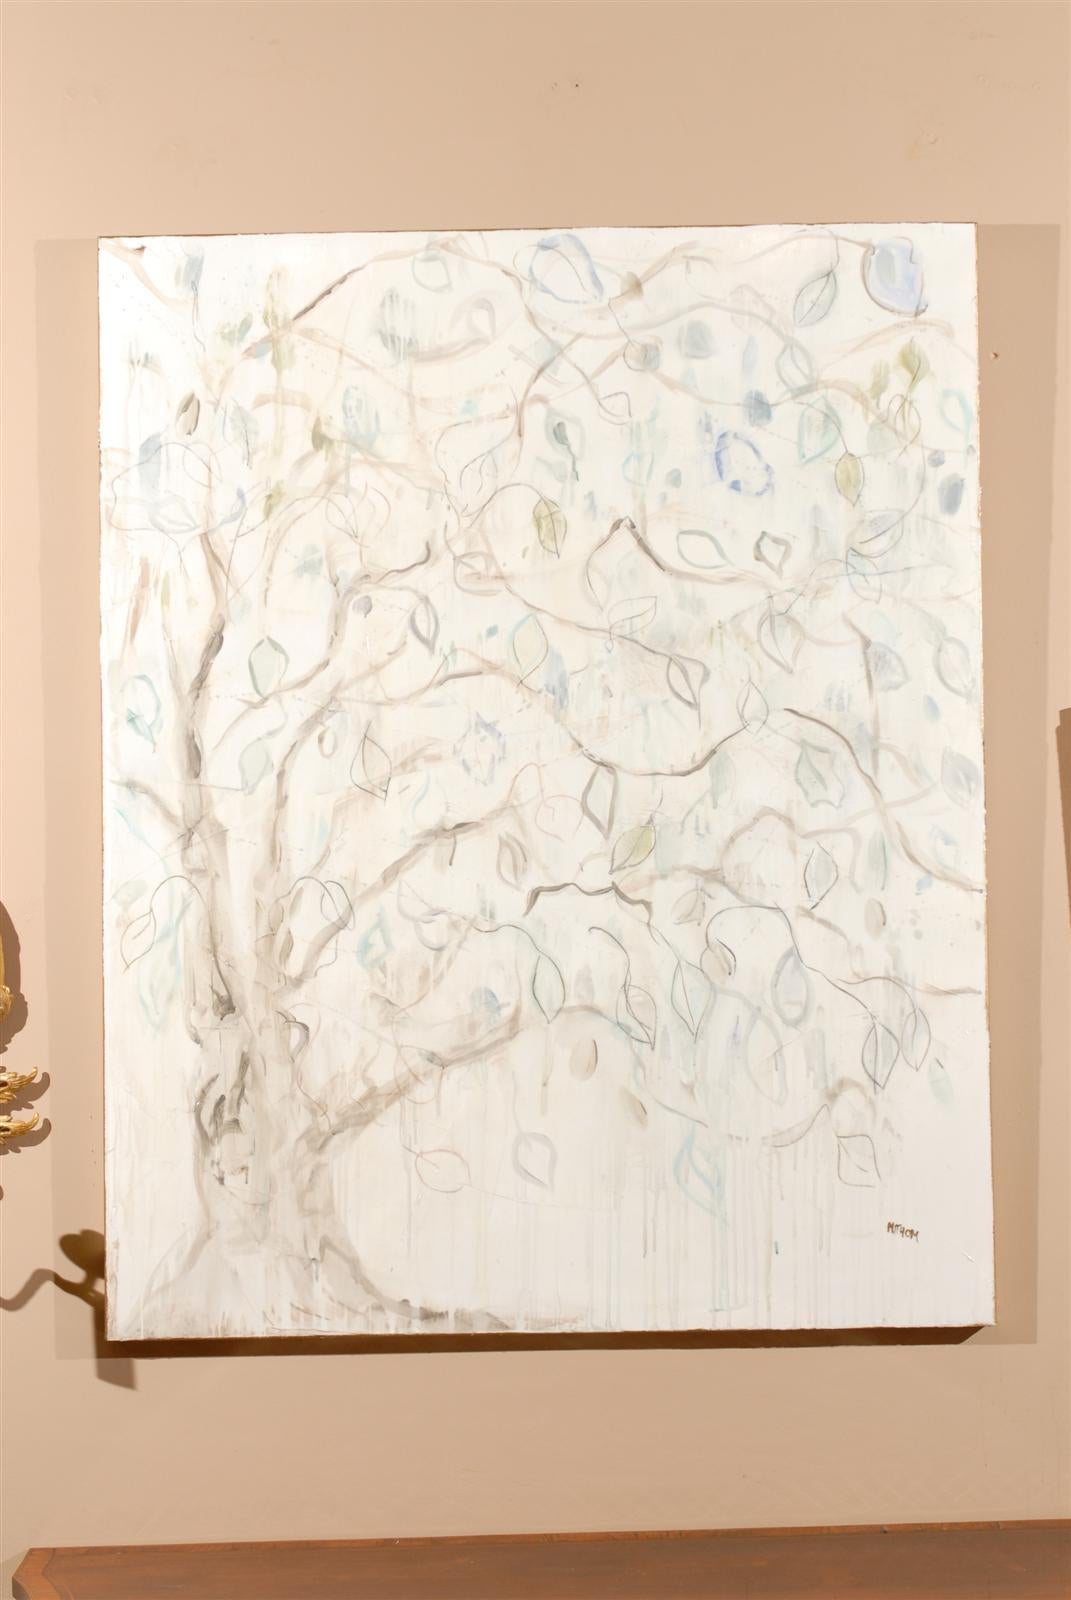 A large lovely original painting of a tree with leaves in neutral colors and some light aqua leaves. It is signed on the lower right